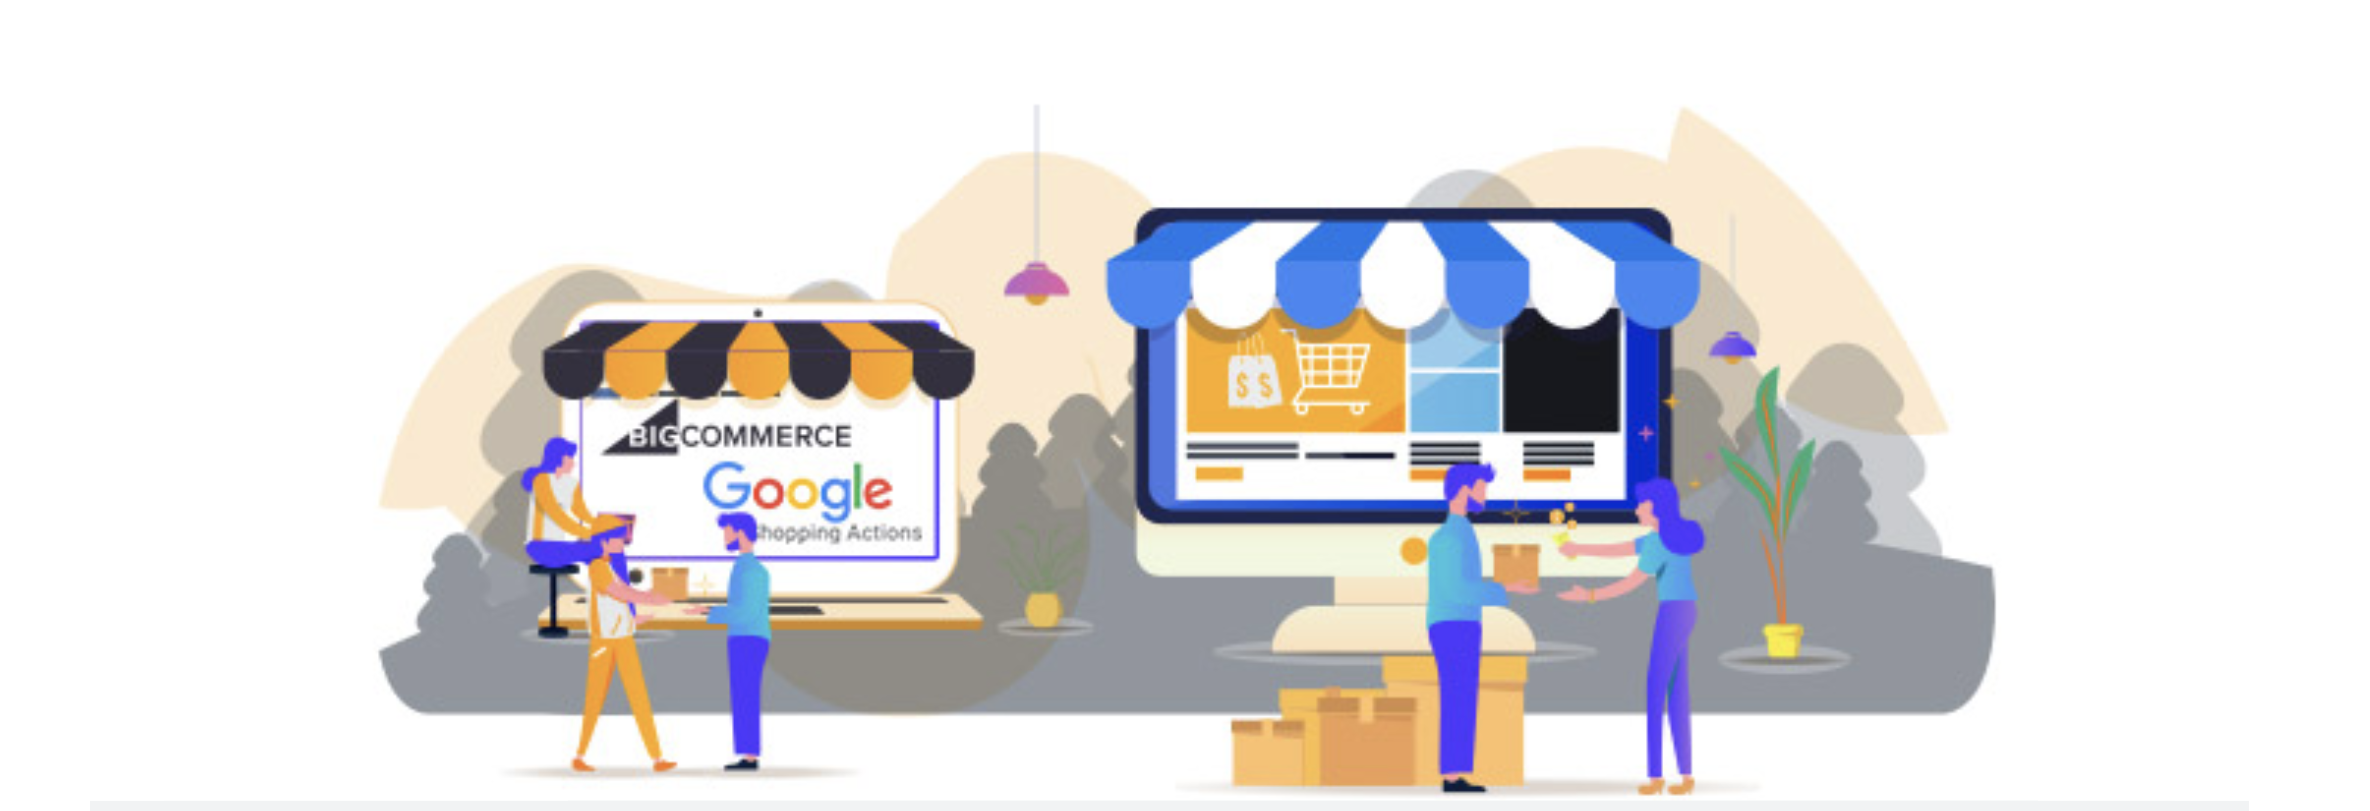 Why use Google Shopping for BigCommerce stores?